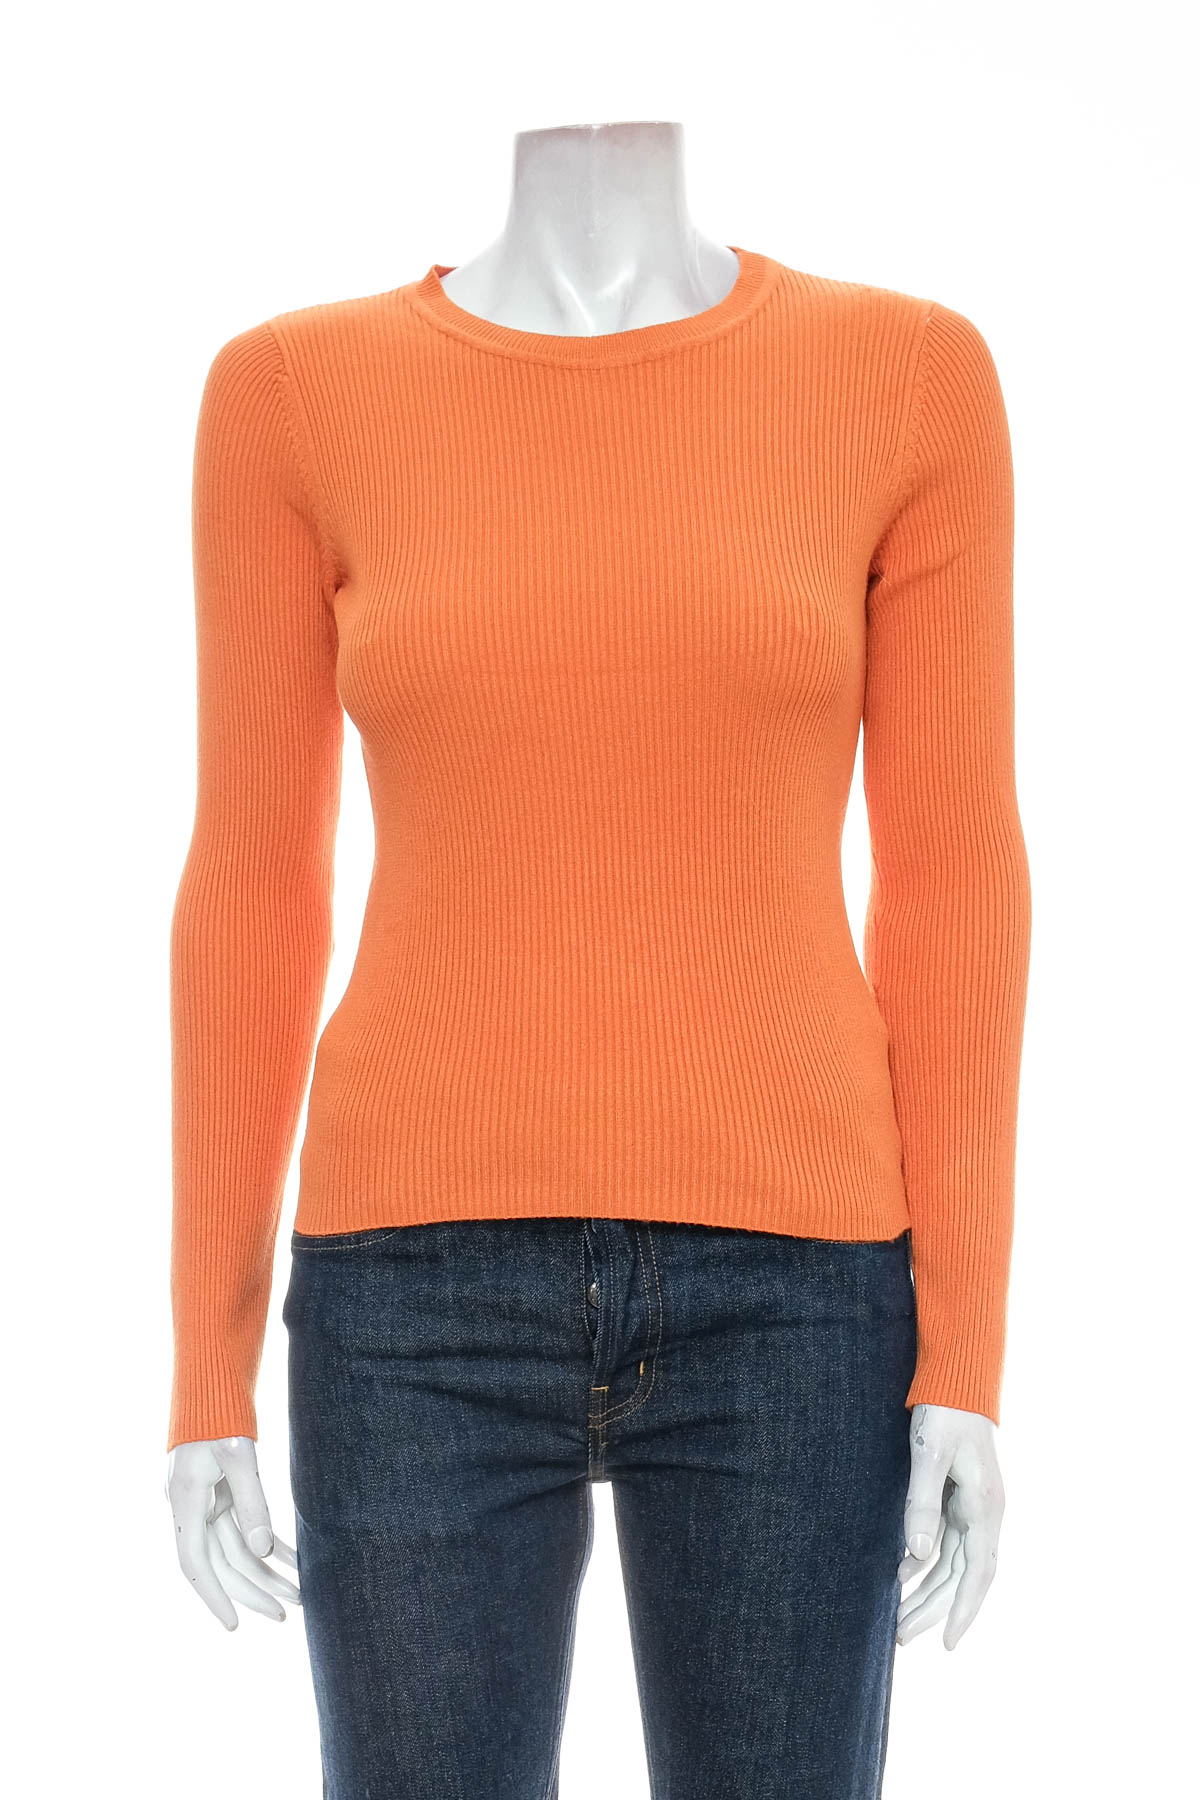 Women's sweater - RESERVED - 0